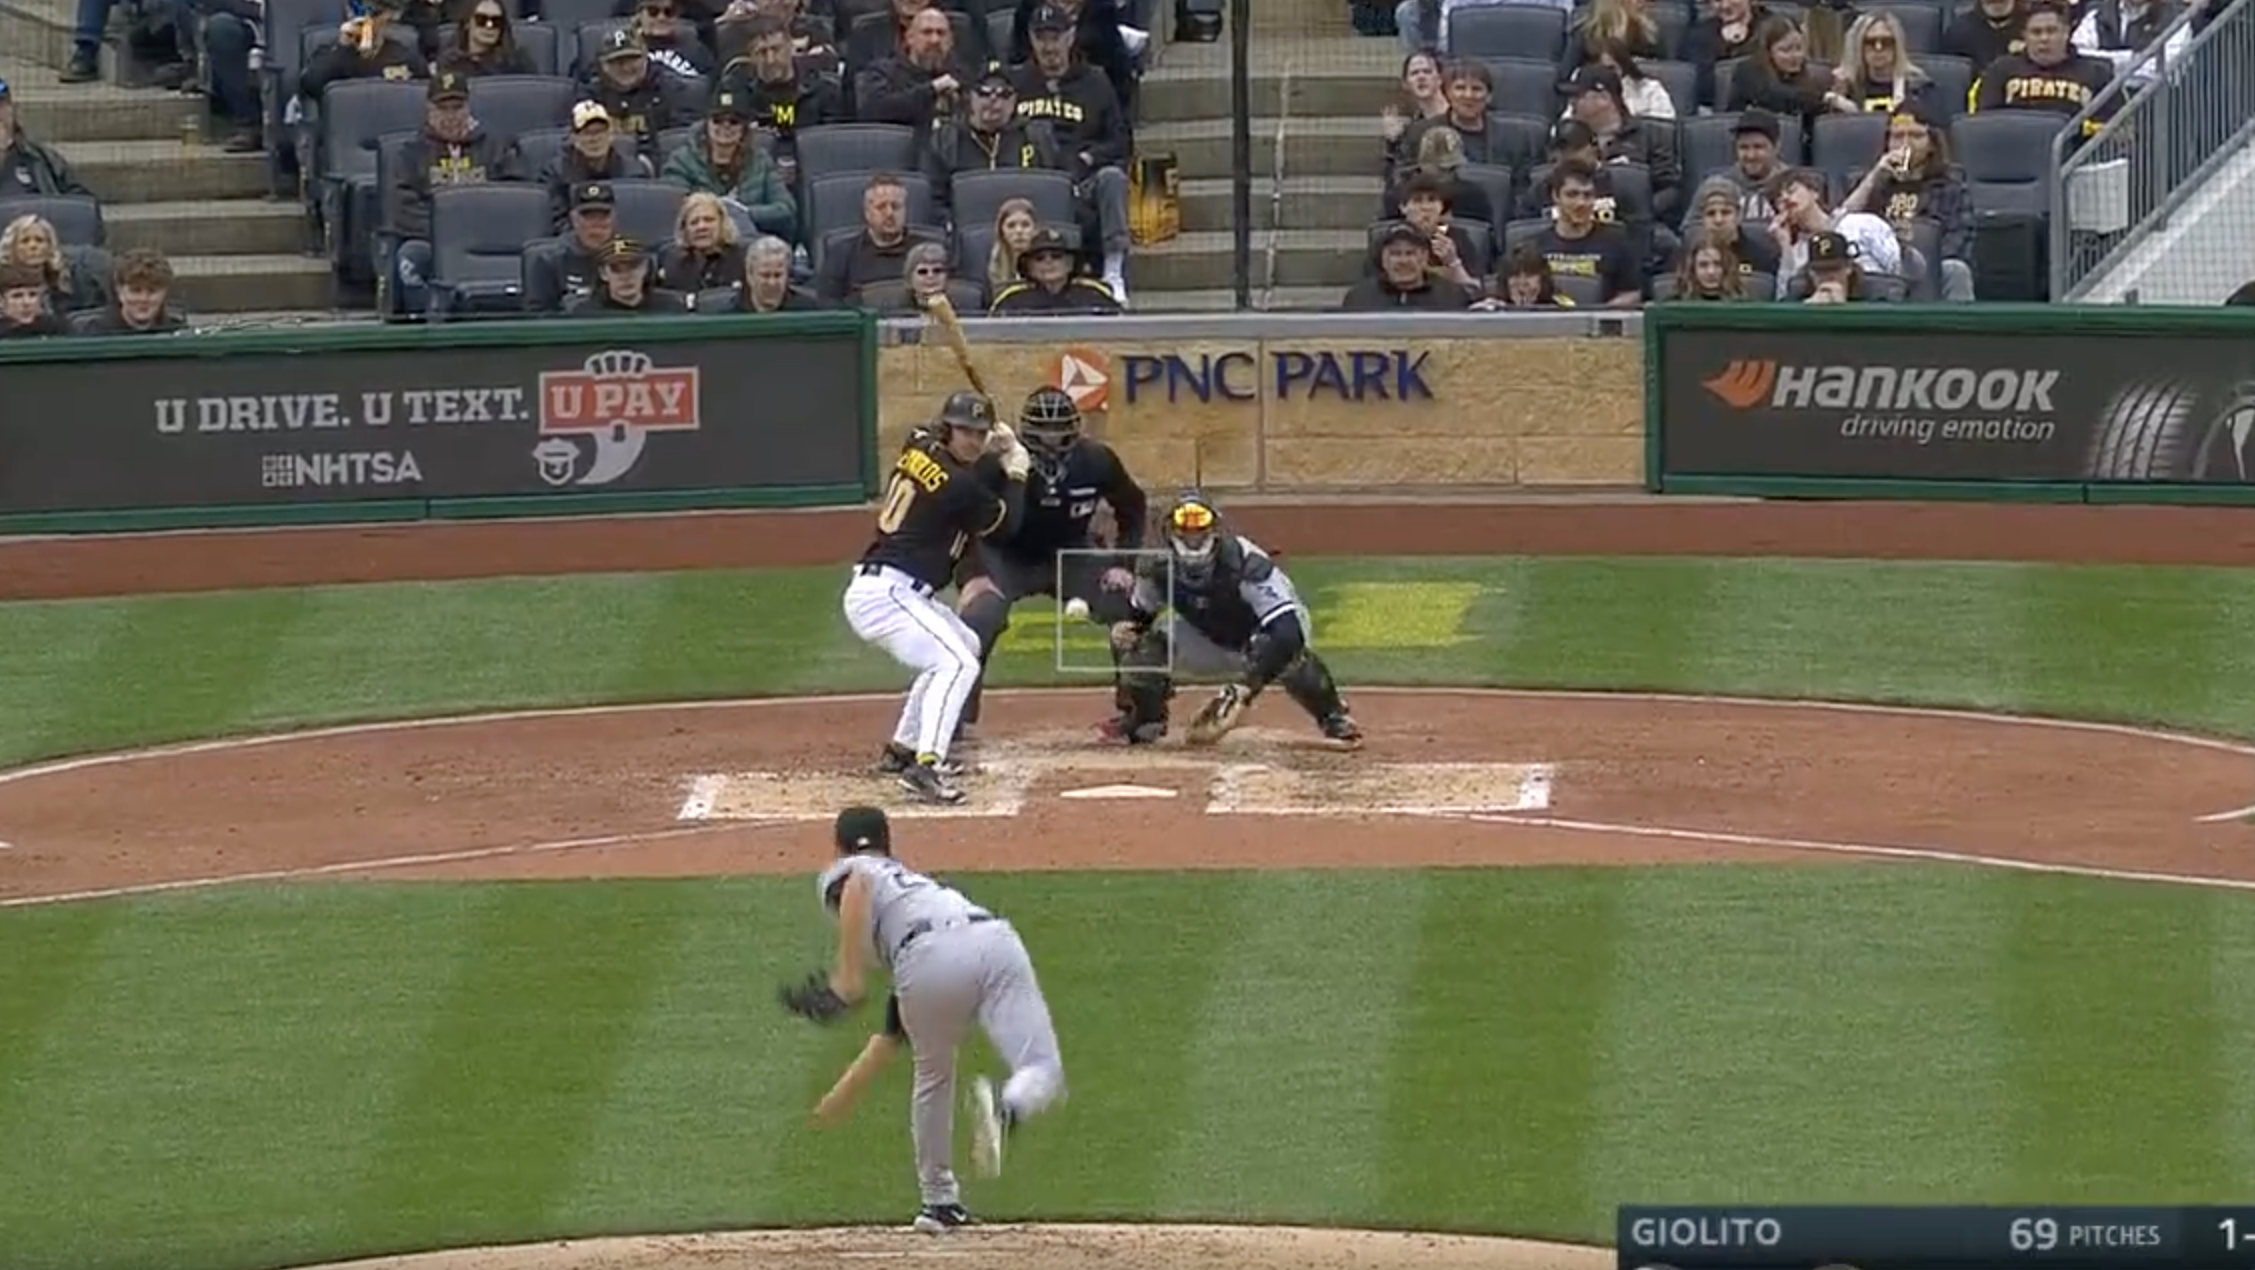 A.J. Burnett, Russell Martin reunite at PNC Park to throw 1st pitch for  Pirates' home opener